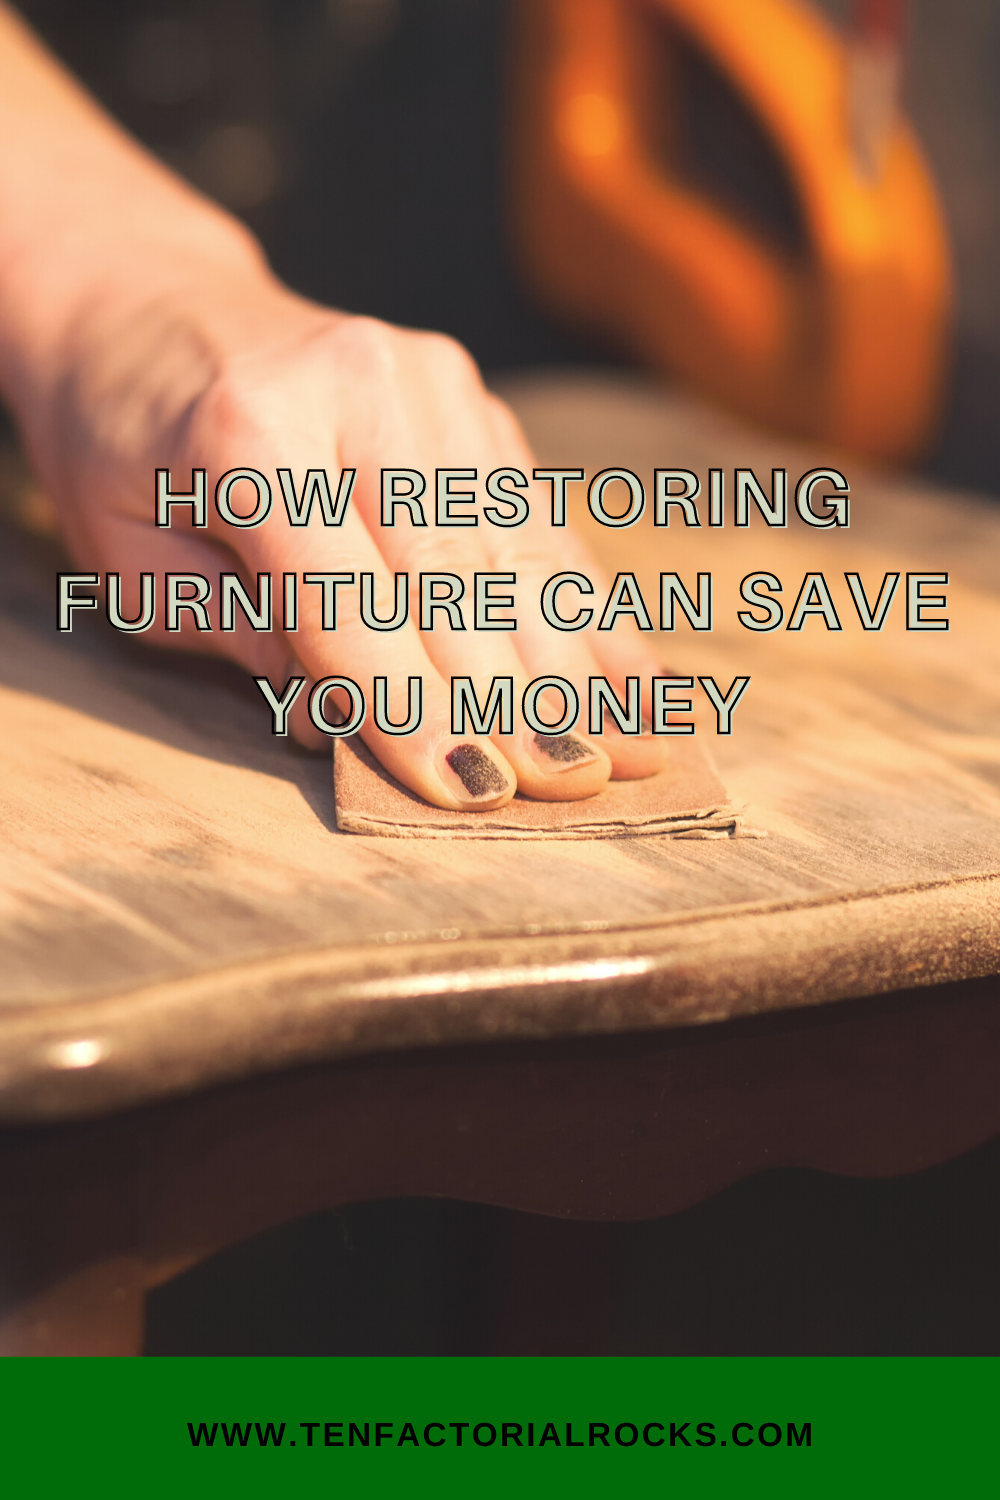 Restoring Furniture Can Save You Money